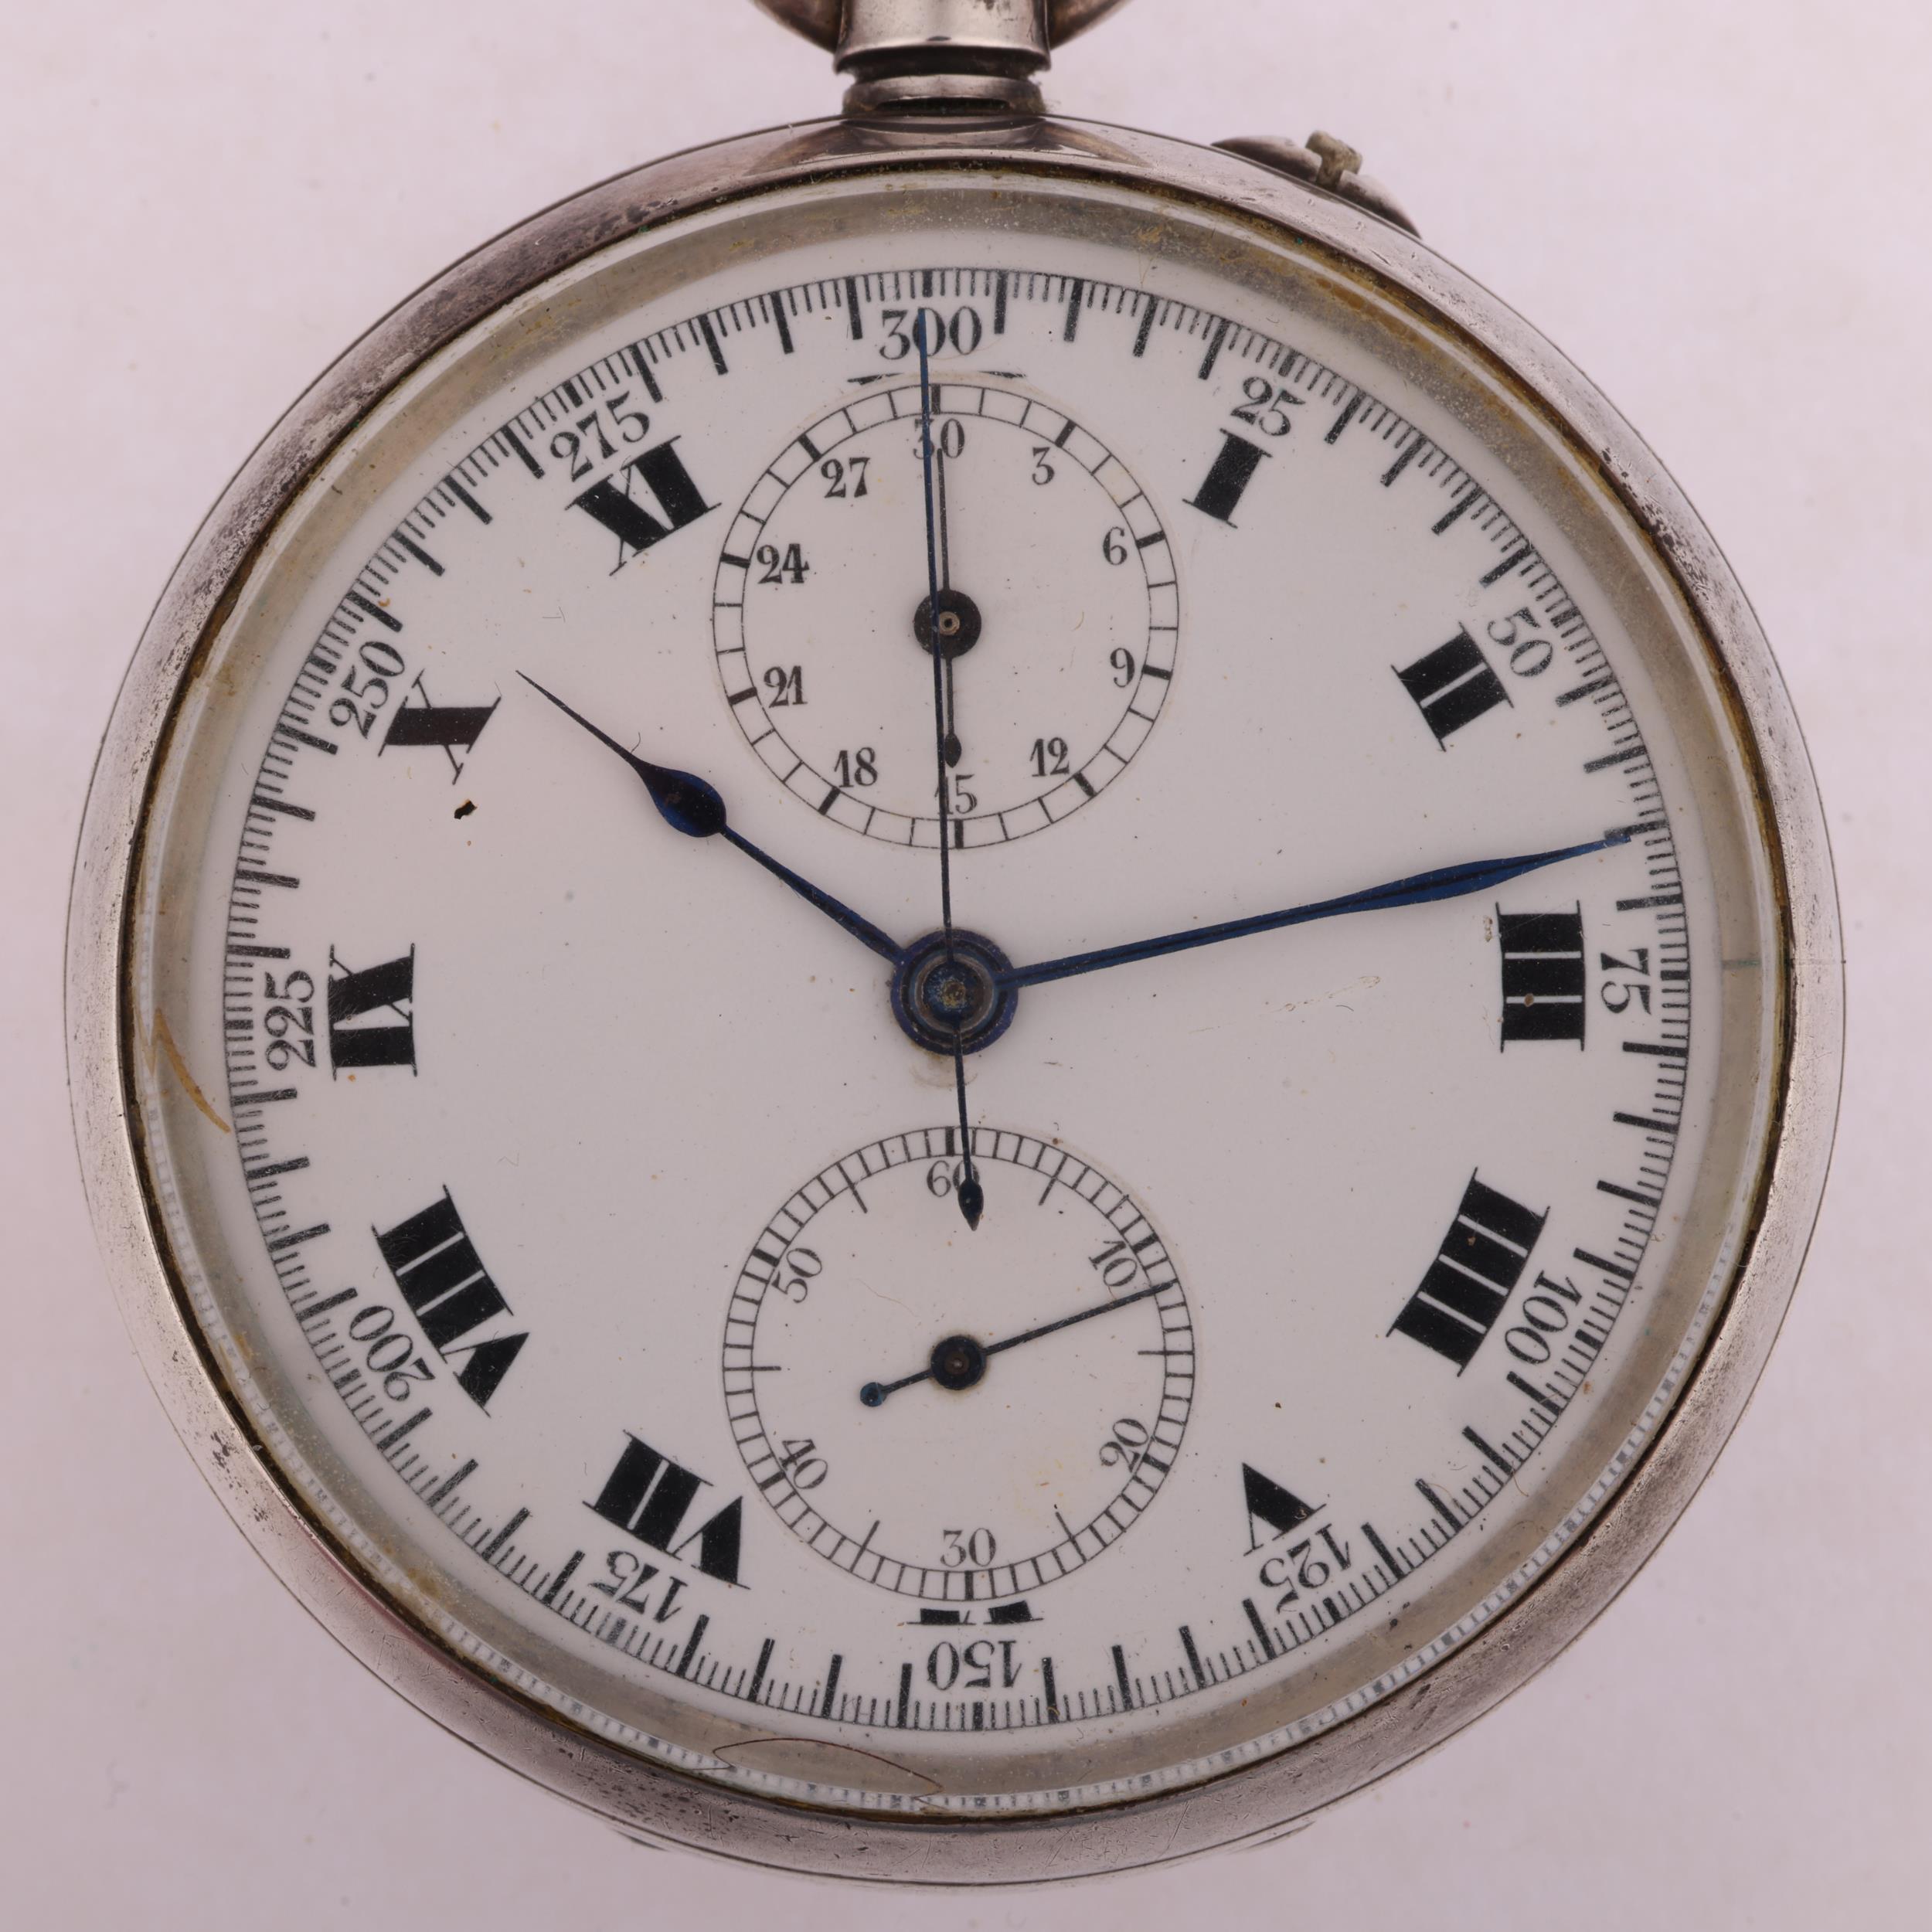 An early 20th century silver-cased open-face keyless chronograph pocket watch, white enamel dial - Image 2 of 5